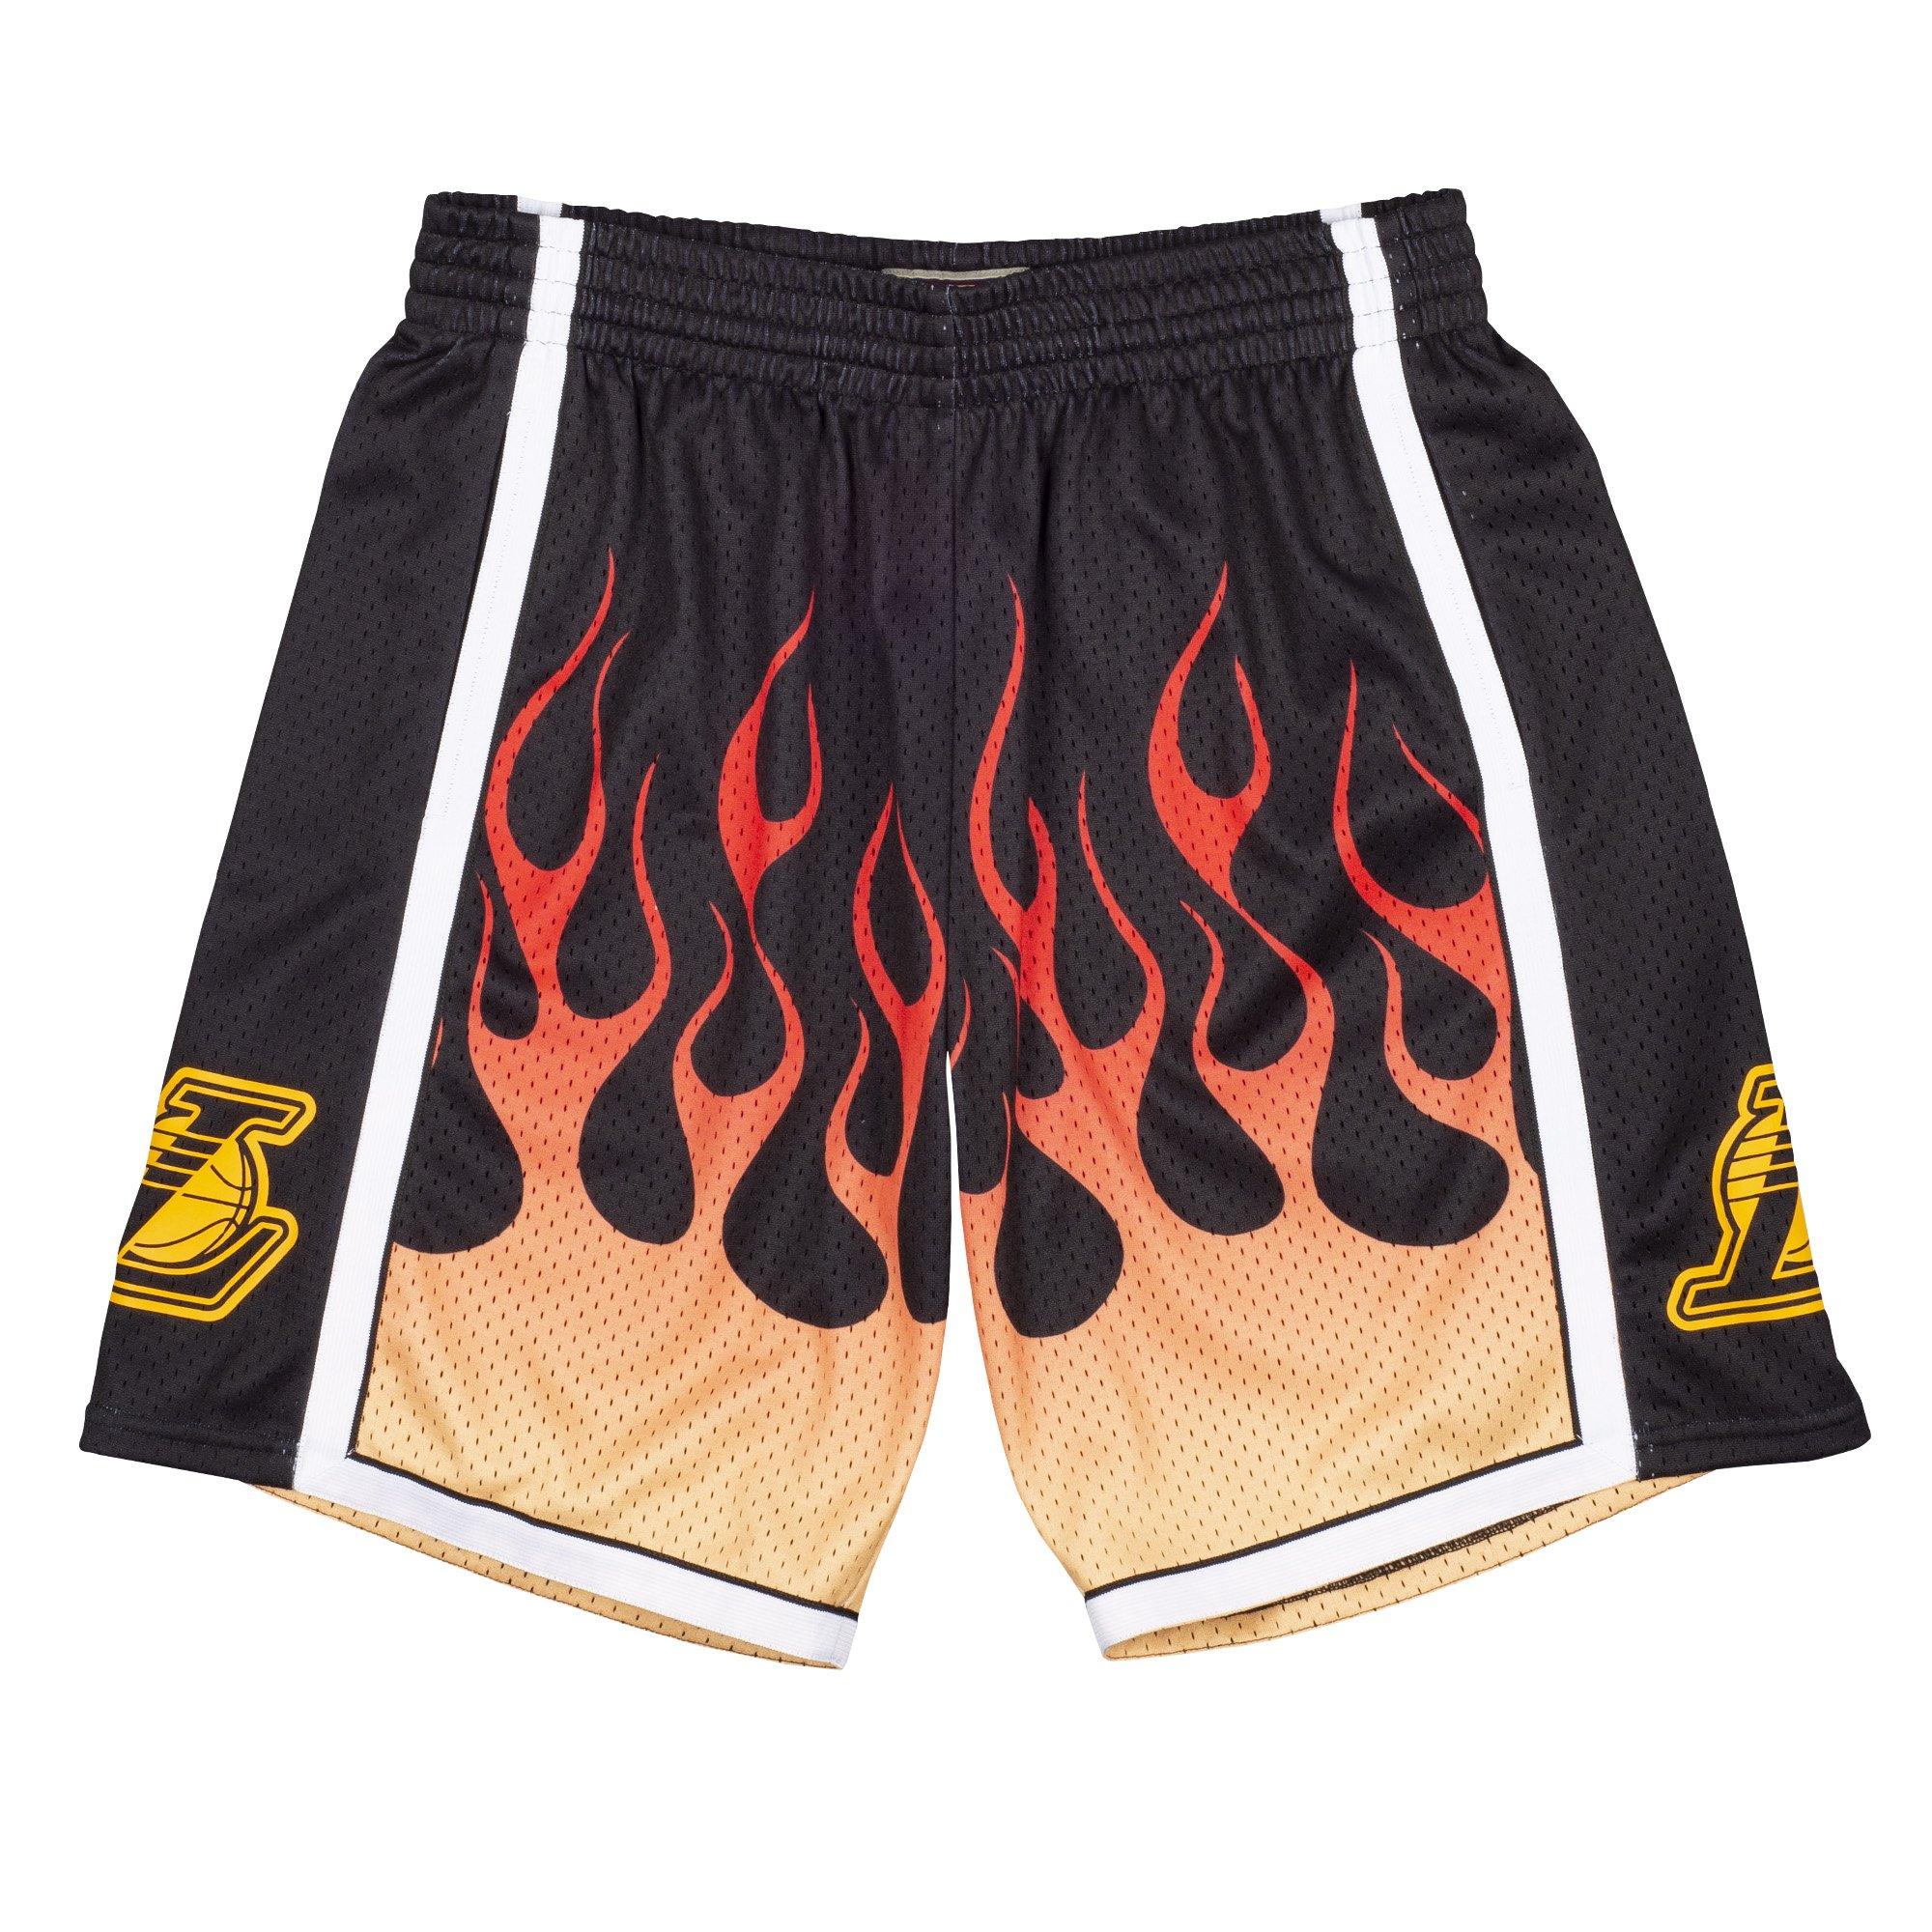 Los Angeles Lakers Spray Paint Mitchell & Ness Swingman Basketball Shorts  Size 2XL for Sale in Las Vegas, NV - OfferUp